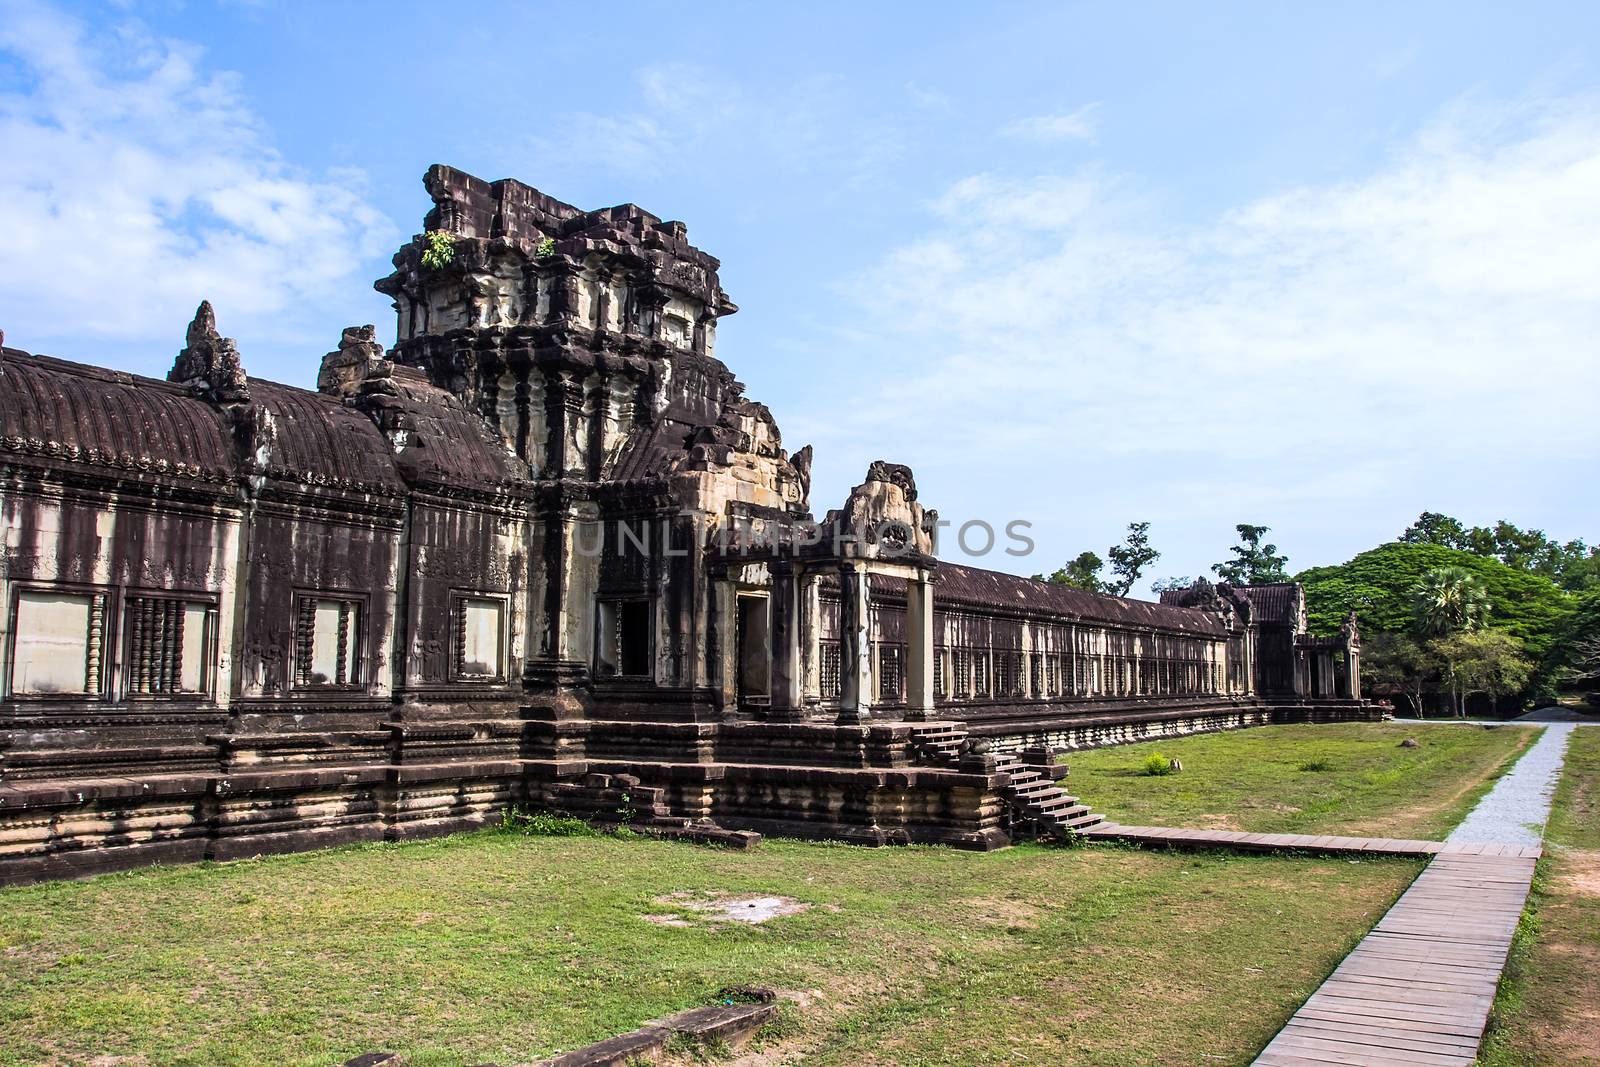 The ancient temple of Angkor Wat near Siem Reap, Cambodia. by kannapon